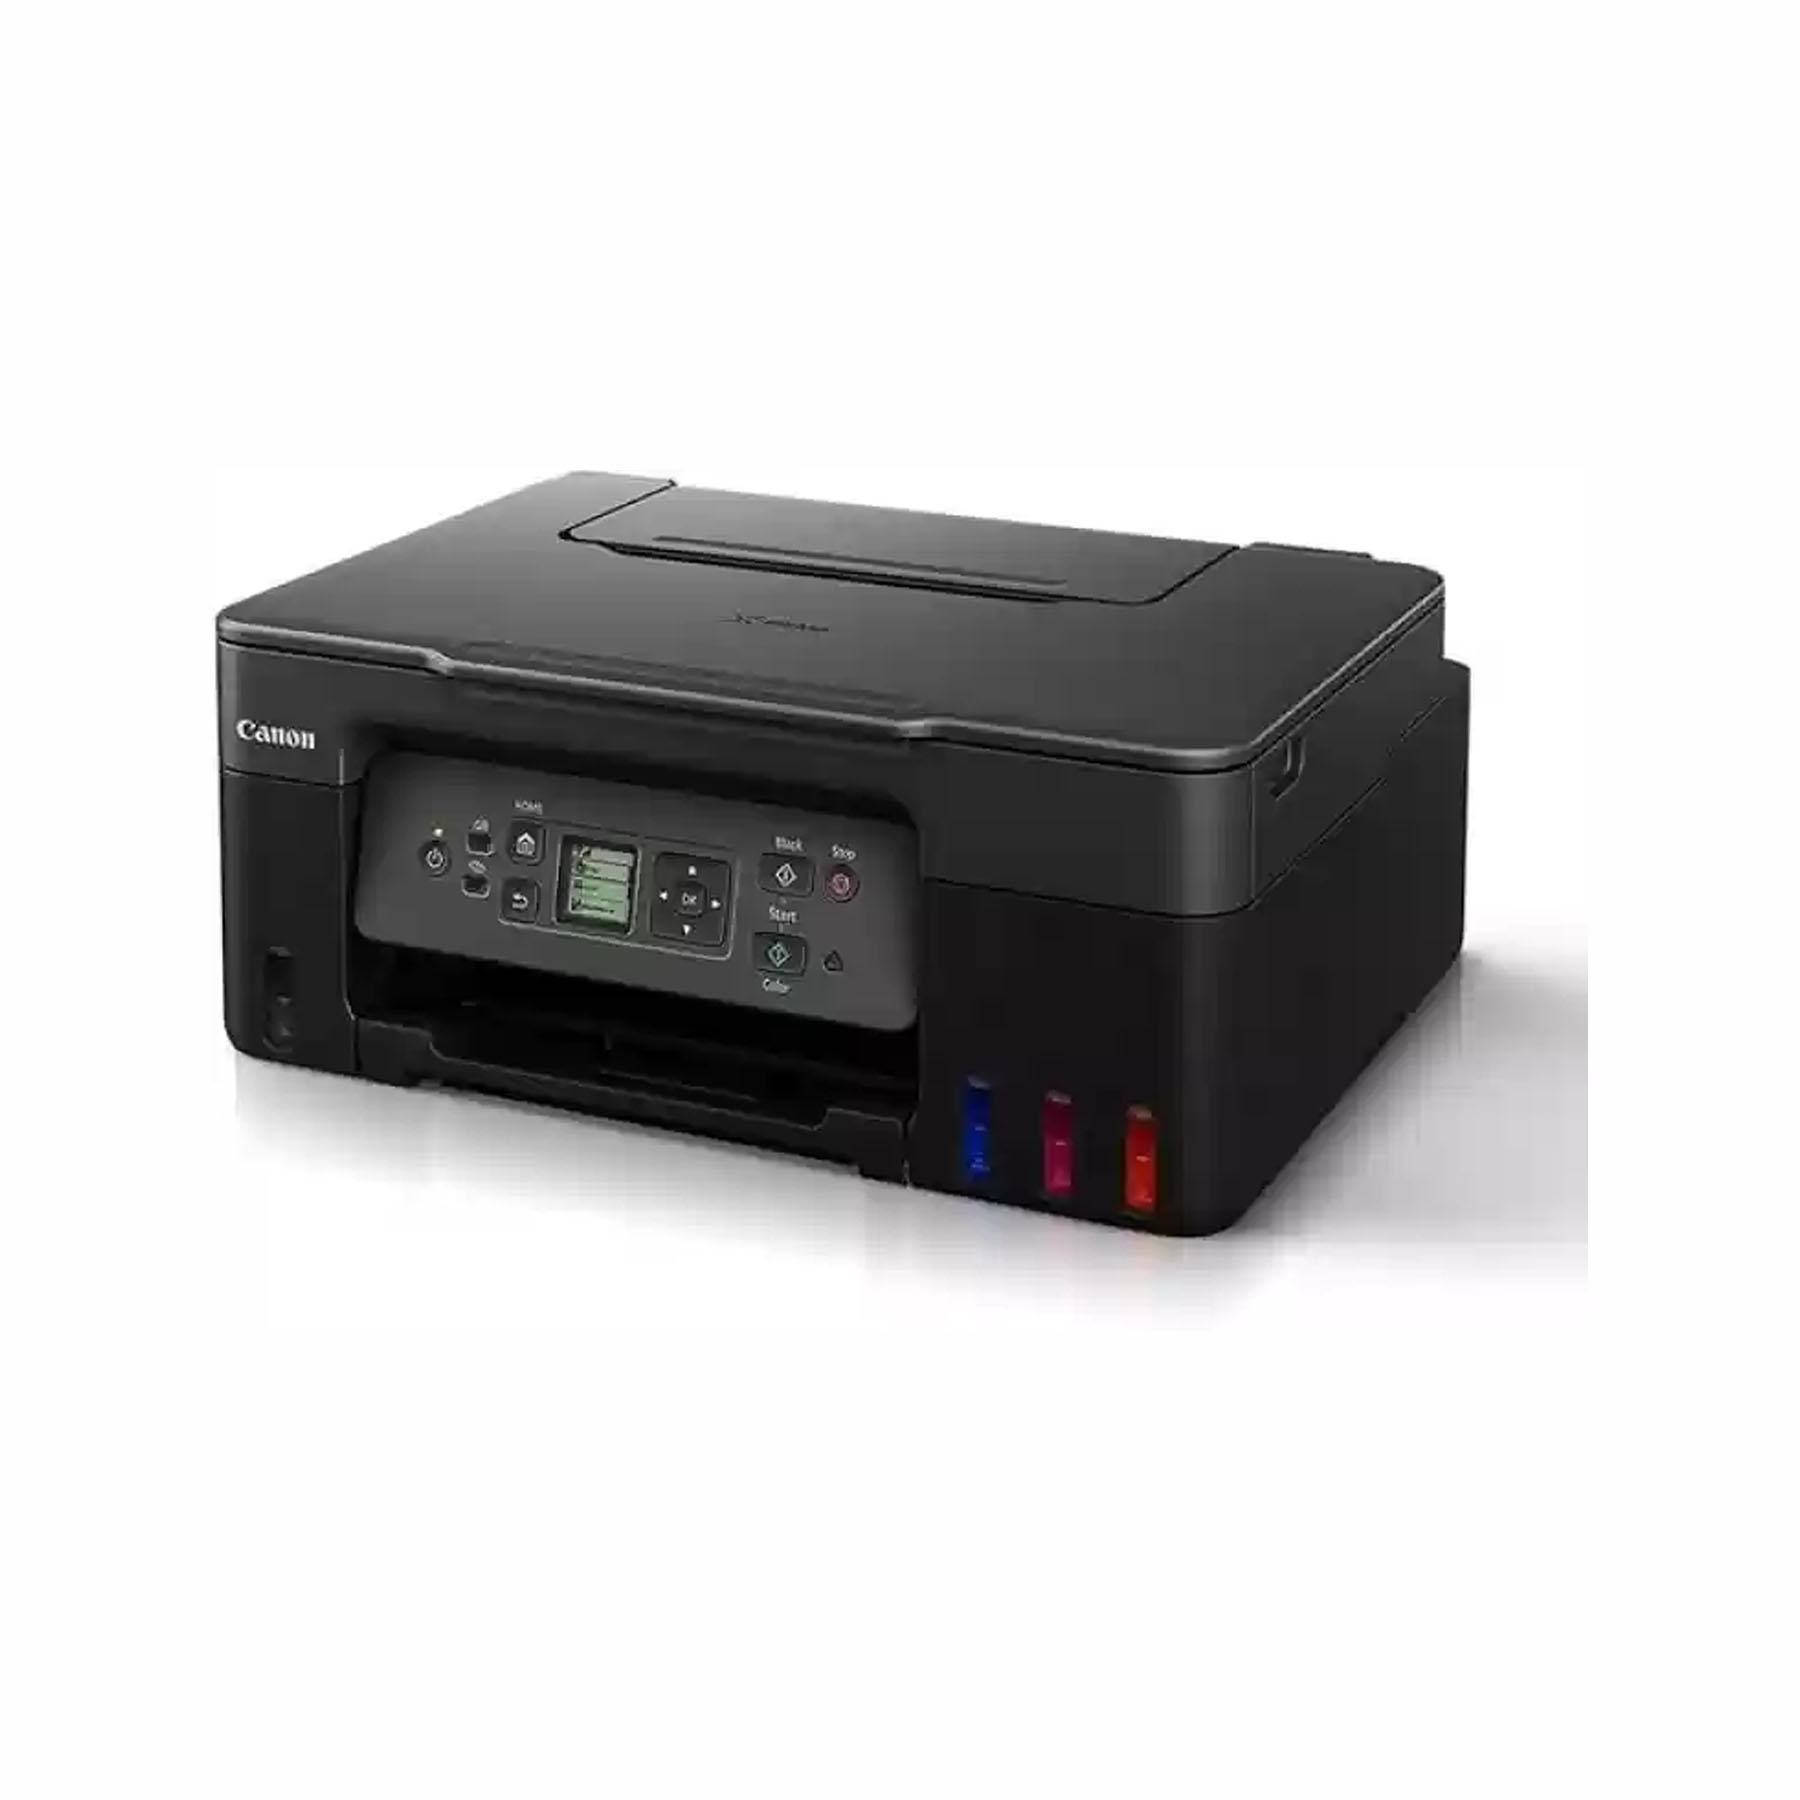 Canon PIXMA G3770 Wireless Refillable Ink Tank Printer with Low-Cost Printing